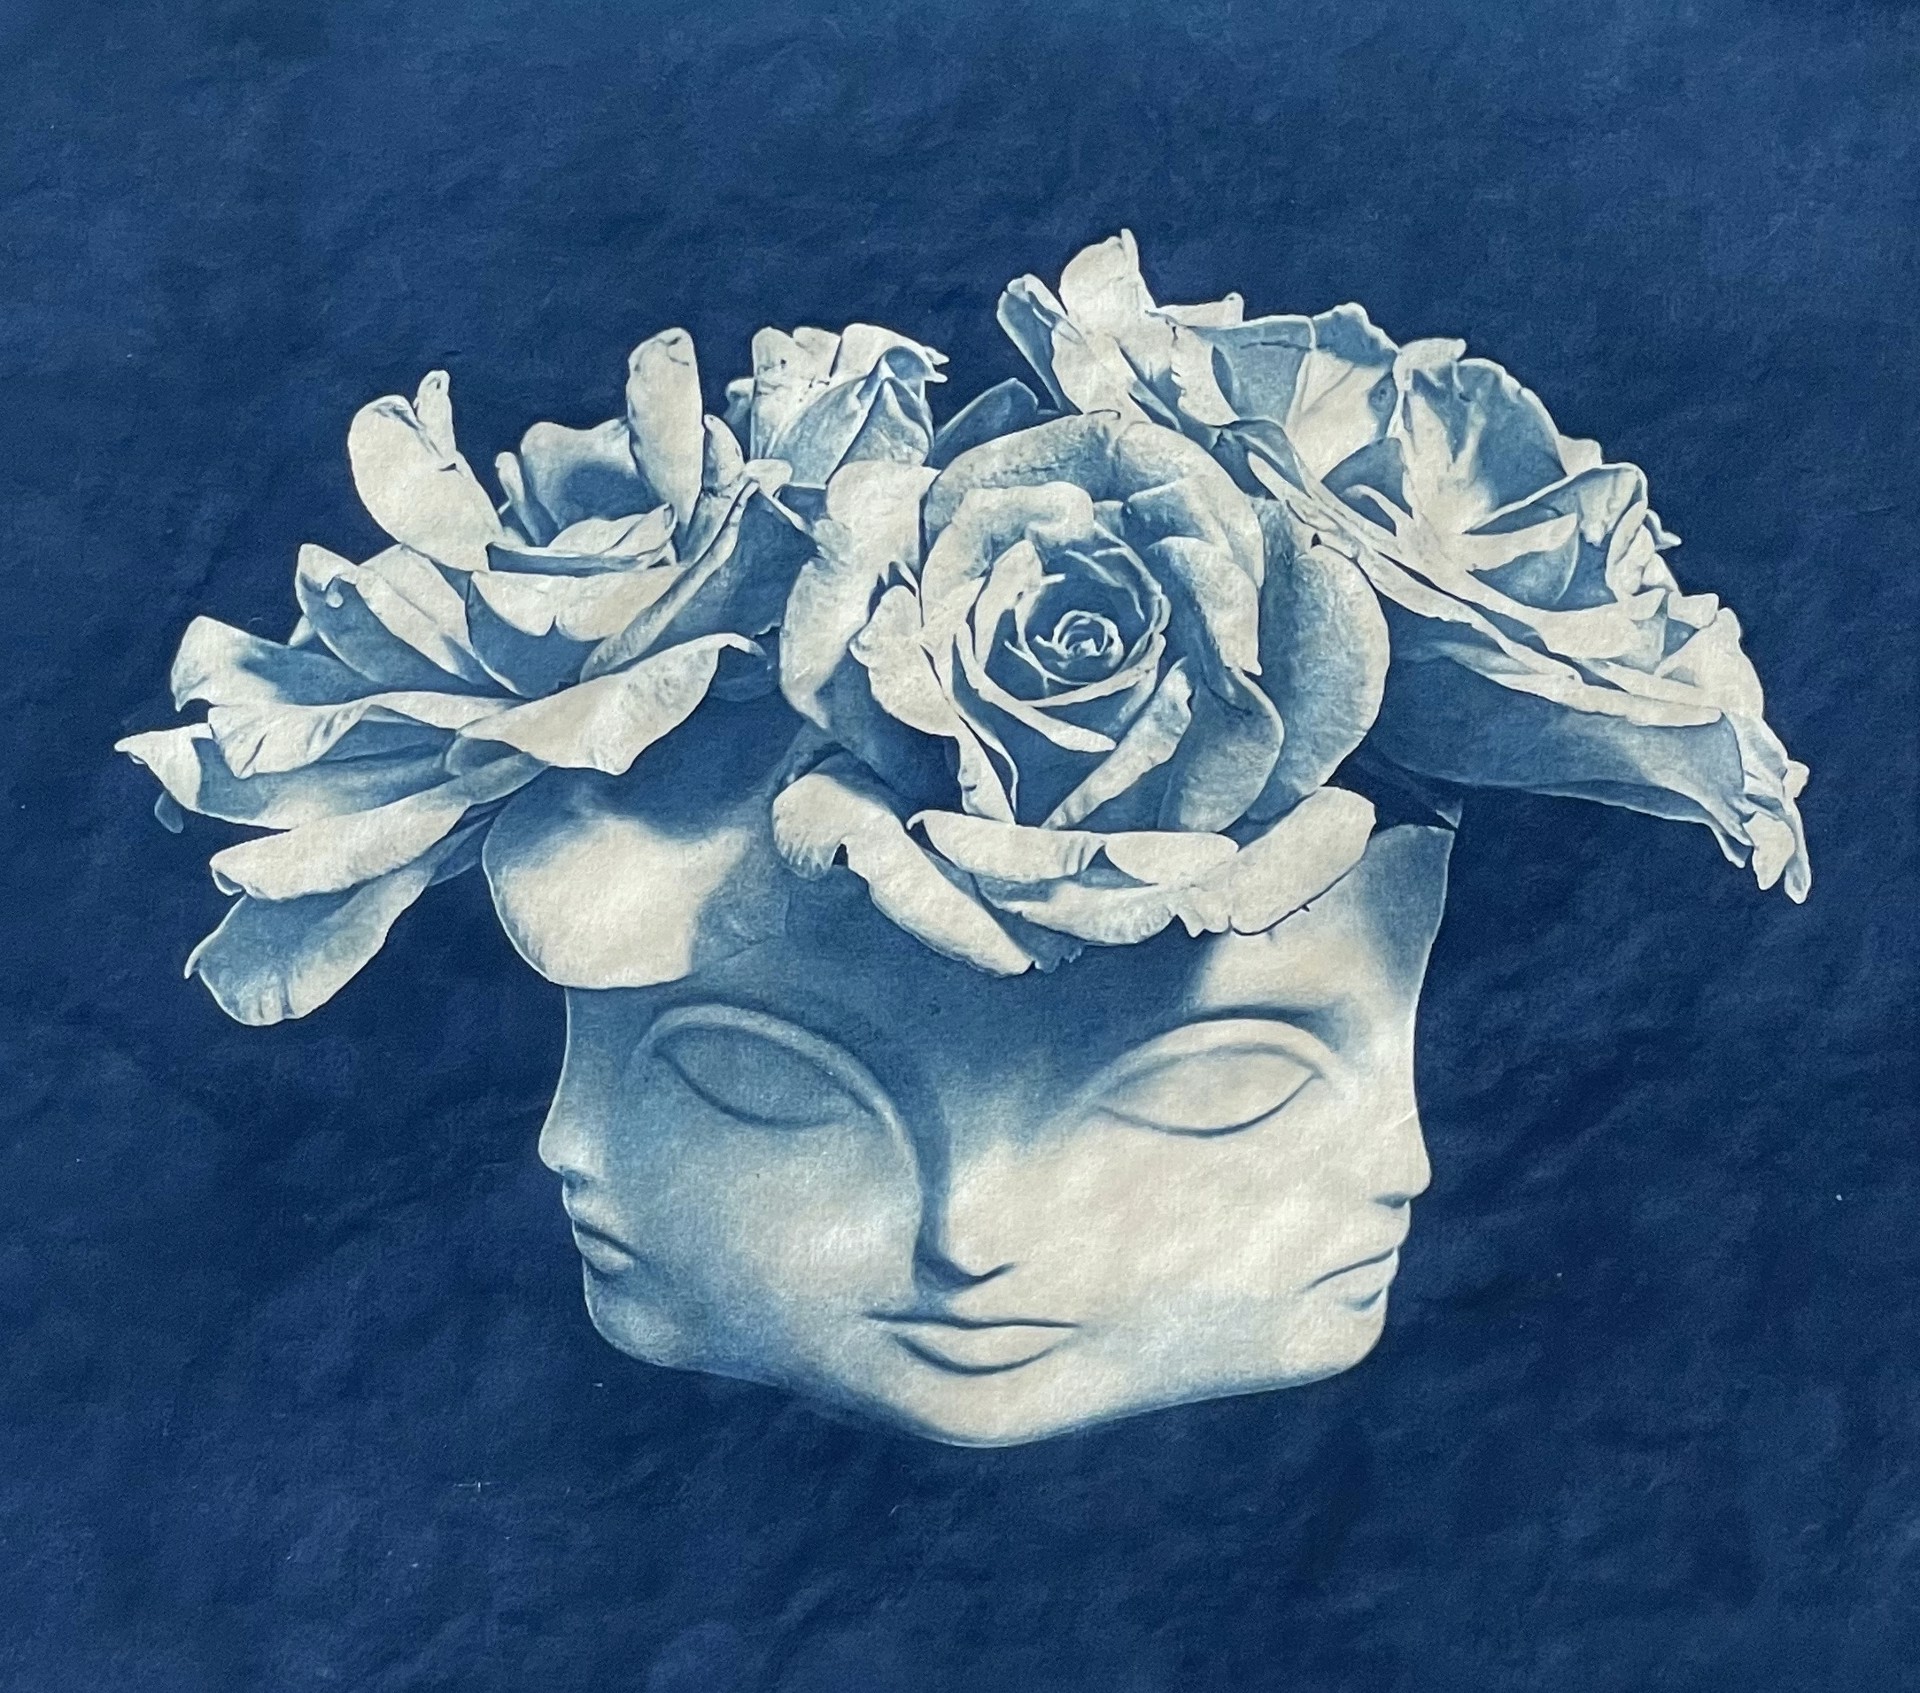 Muse & Roses by Claudia Hollister